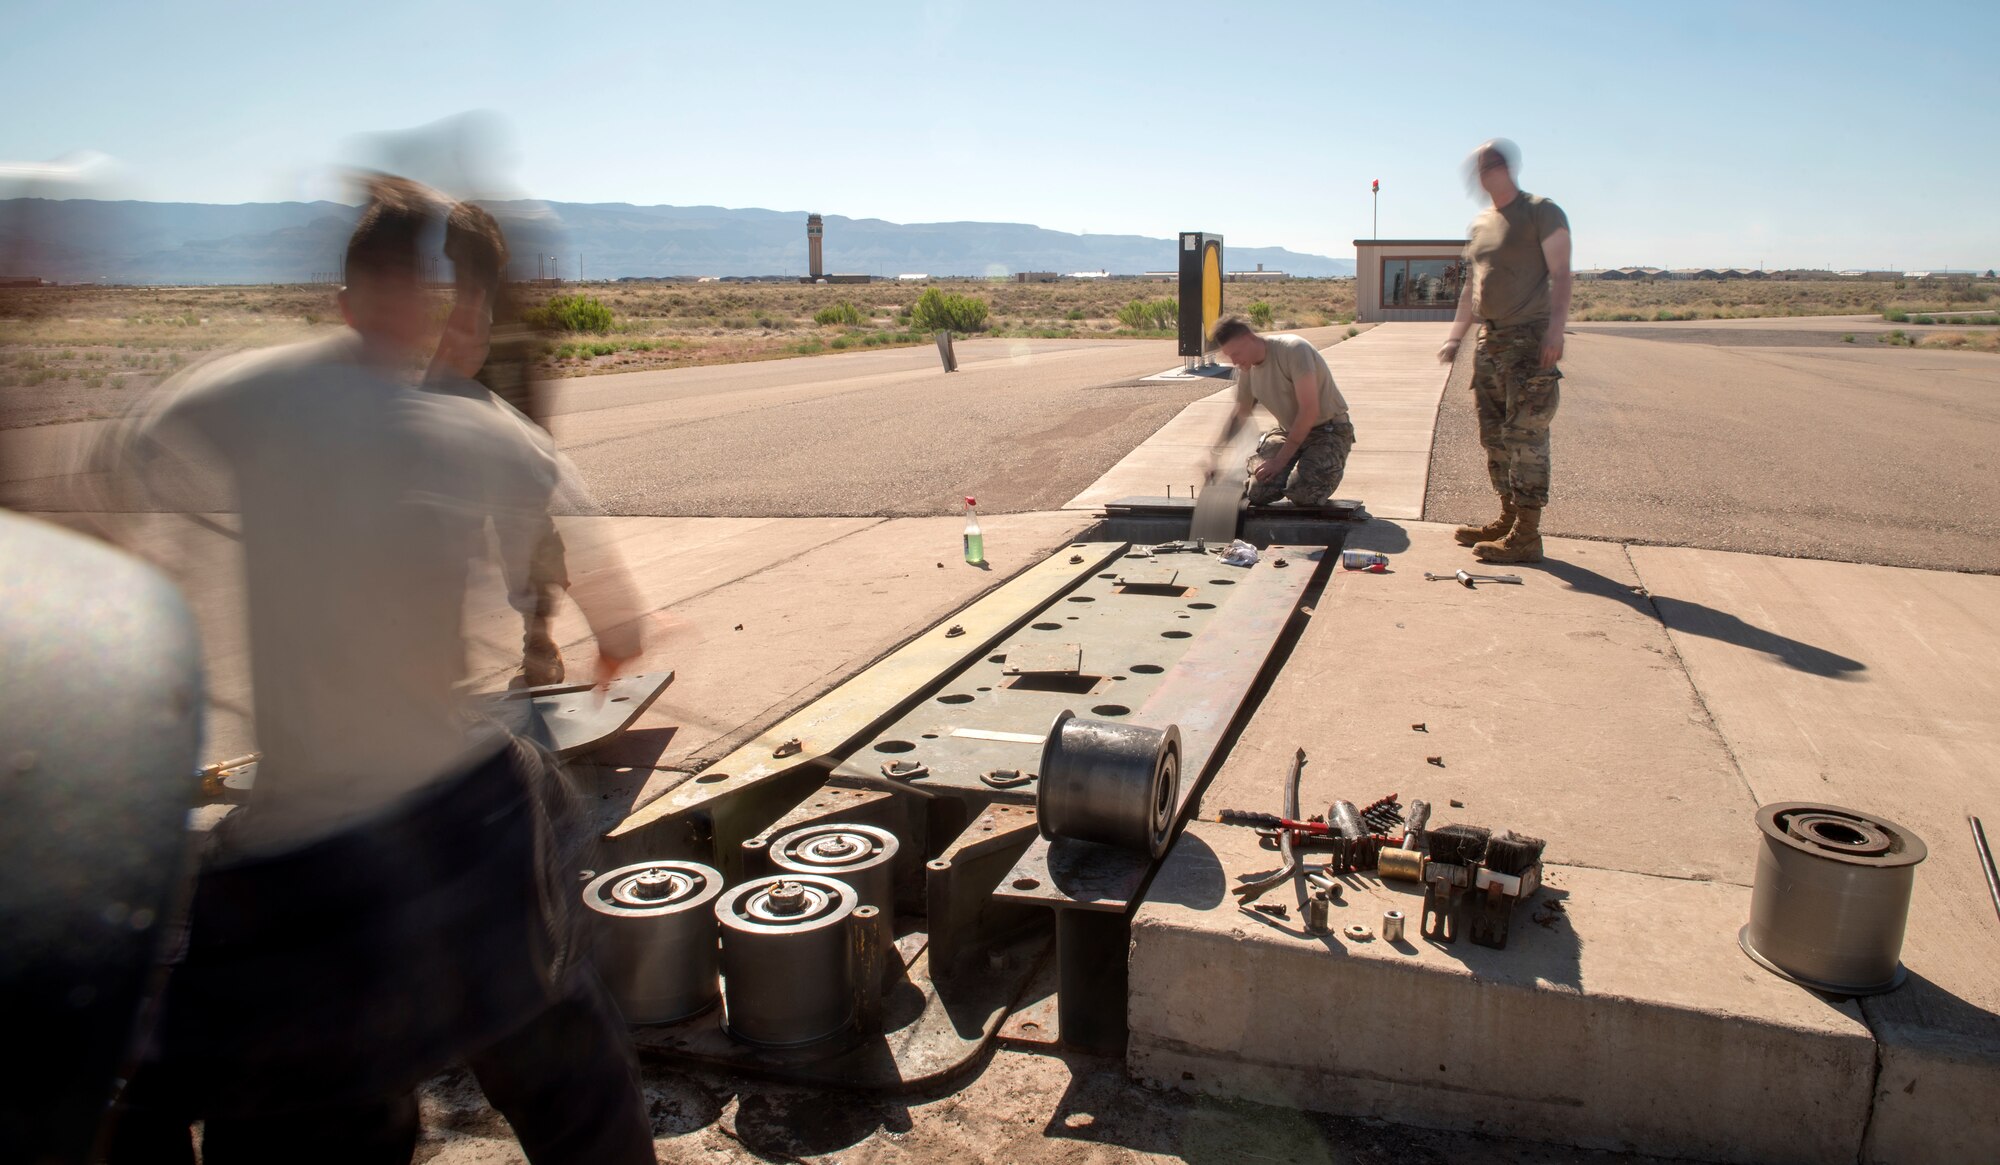 Airmen from the 49th Civil Engineer Squadron electrical power production shop reassemble a barrier on the flightline, on Holloman Air Force Base, N.M., April 21, 2020. The Airmen’s daily responsibilities include inspecting and servicing items across base such as the power supply to buildings, anti-vehicle barriers and aircraft arresting system barriers. (U.S. Air Force photo by Staff Sgt. Christine Groening)